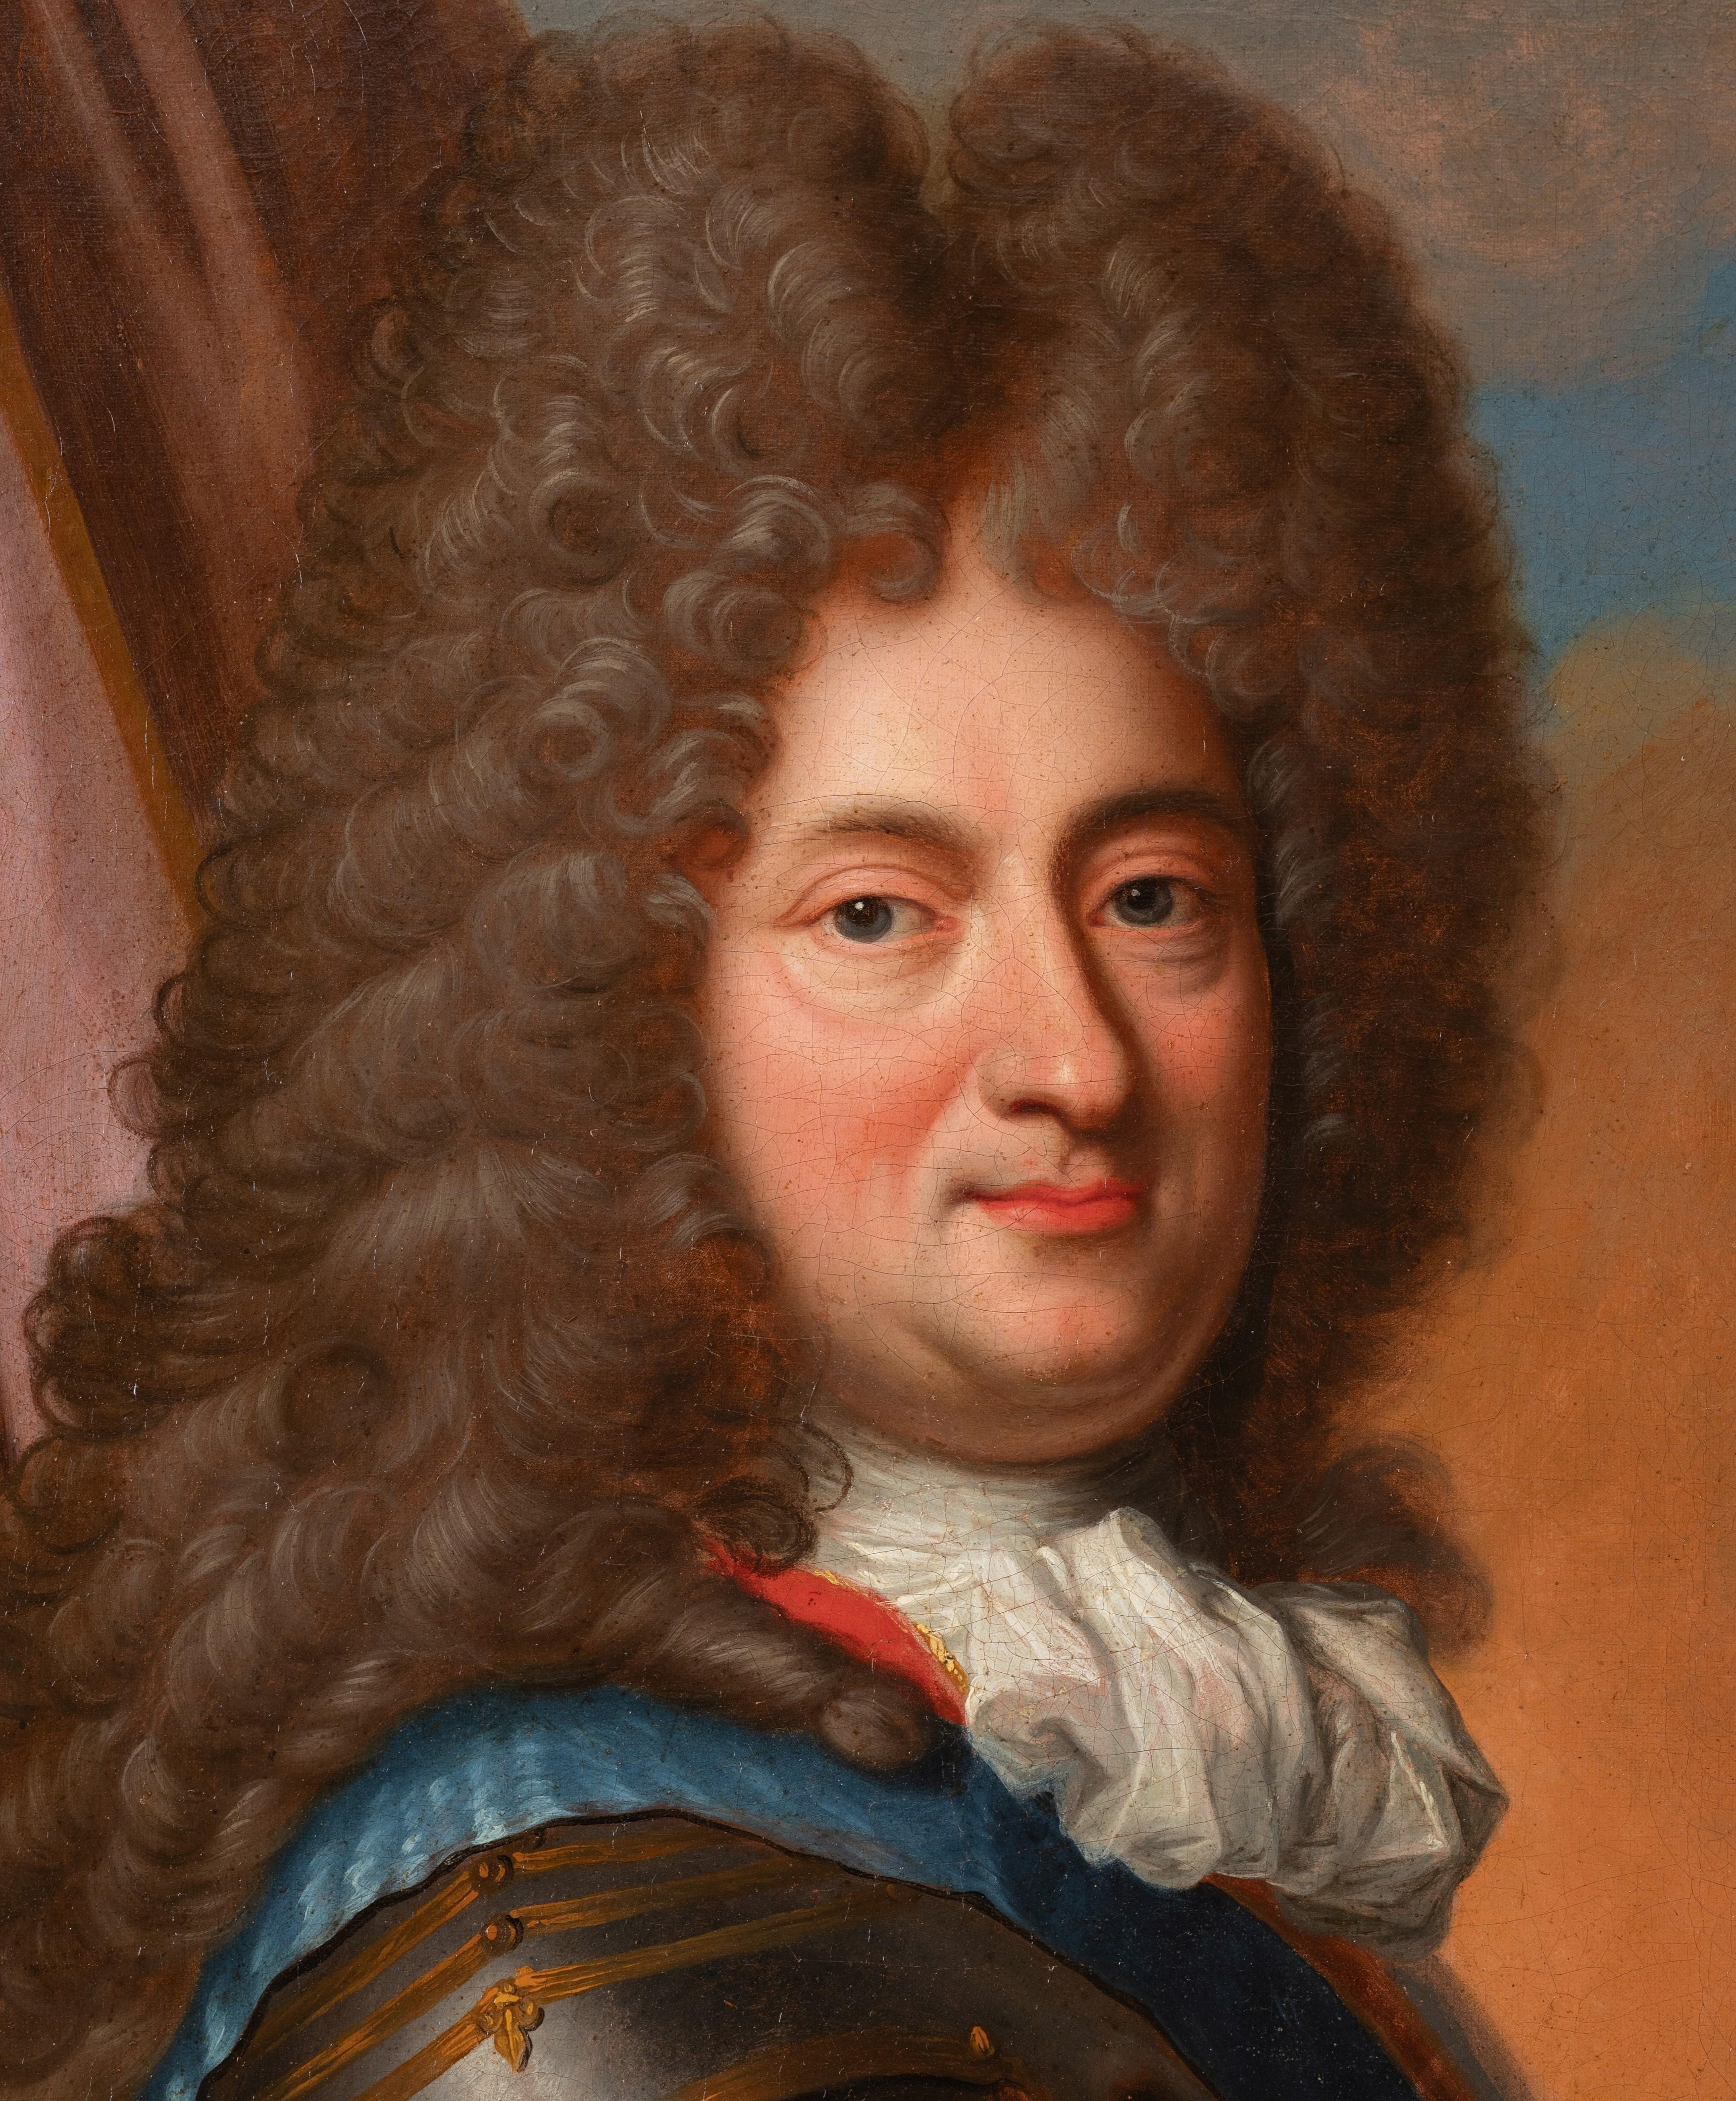 Philippe II, Duke of Orleans, French prince, 18th c. French school - Old Masters Painting by Jean Baptiste Santerre